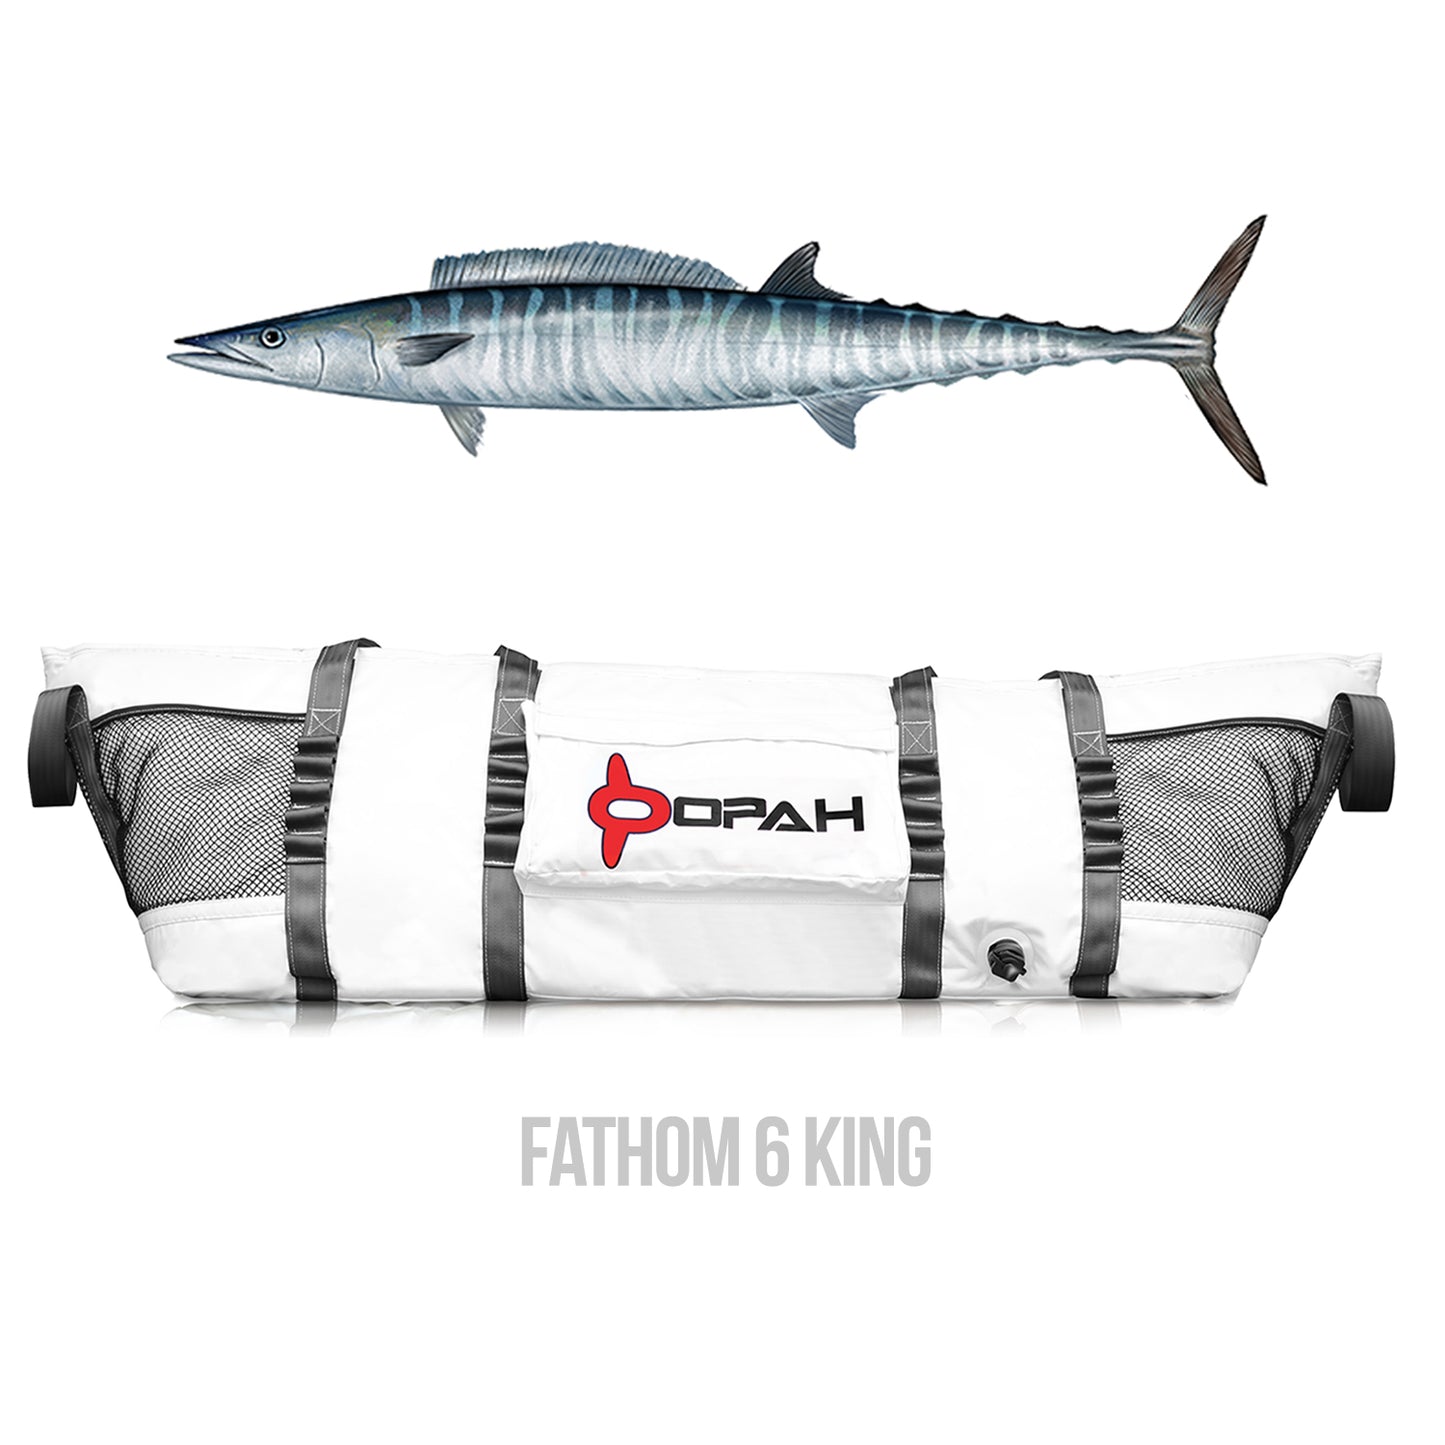 Opah Gear Fathom 6 King Fish Cooler Bag Kill Bag. Protect your catch longer. The most reliable fish bag on the market. Purposely built to be the highest quality fish cooler bag in sportfishing. Even great when used as an insulated cooler bag while out camping or for other normal use. The highest quality insulated bag. A perfect Tuna Kill Bag, Dorado Kill bag, or yellowtail kill bag. 